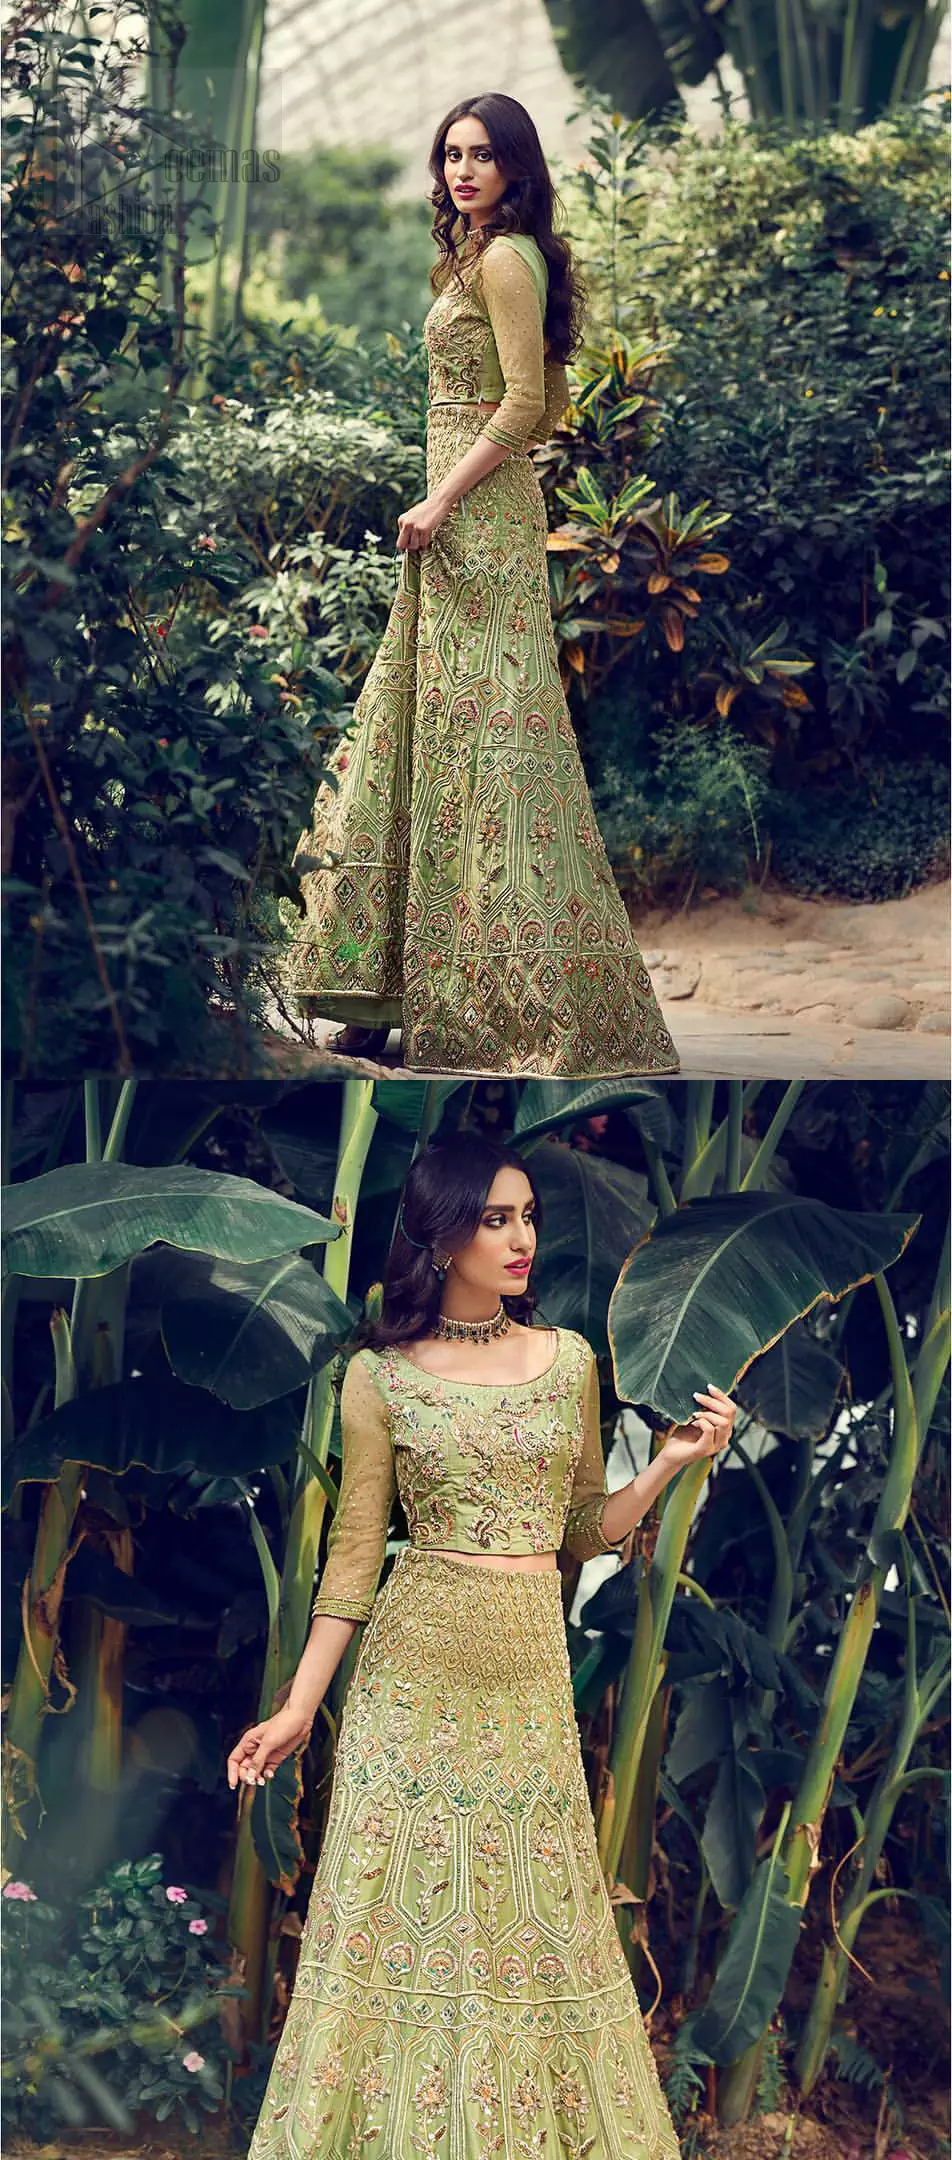 Nothing speaks of femininity and class louder than this mehndi outfits for bridesmaids. Steal the moment with this outfit with this shabby chic statement intensified with rich thread embroidery all over the front and bold patterns at daaman od the lehenga. Furthermore, it is enhanced with floral motifs all over decorated with multiple color thread embroidery. It is coordinated with parrot green blouse done with golden zardozi work and three quarter sleeves. Style it up with chiffon dupatta scattered with sequins all over.